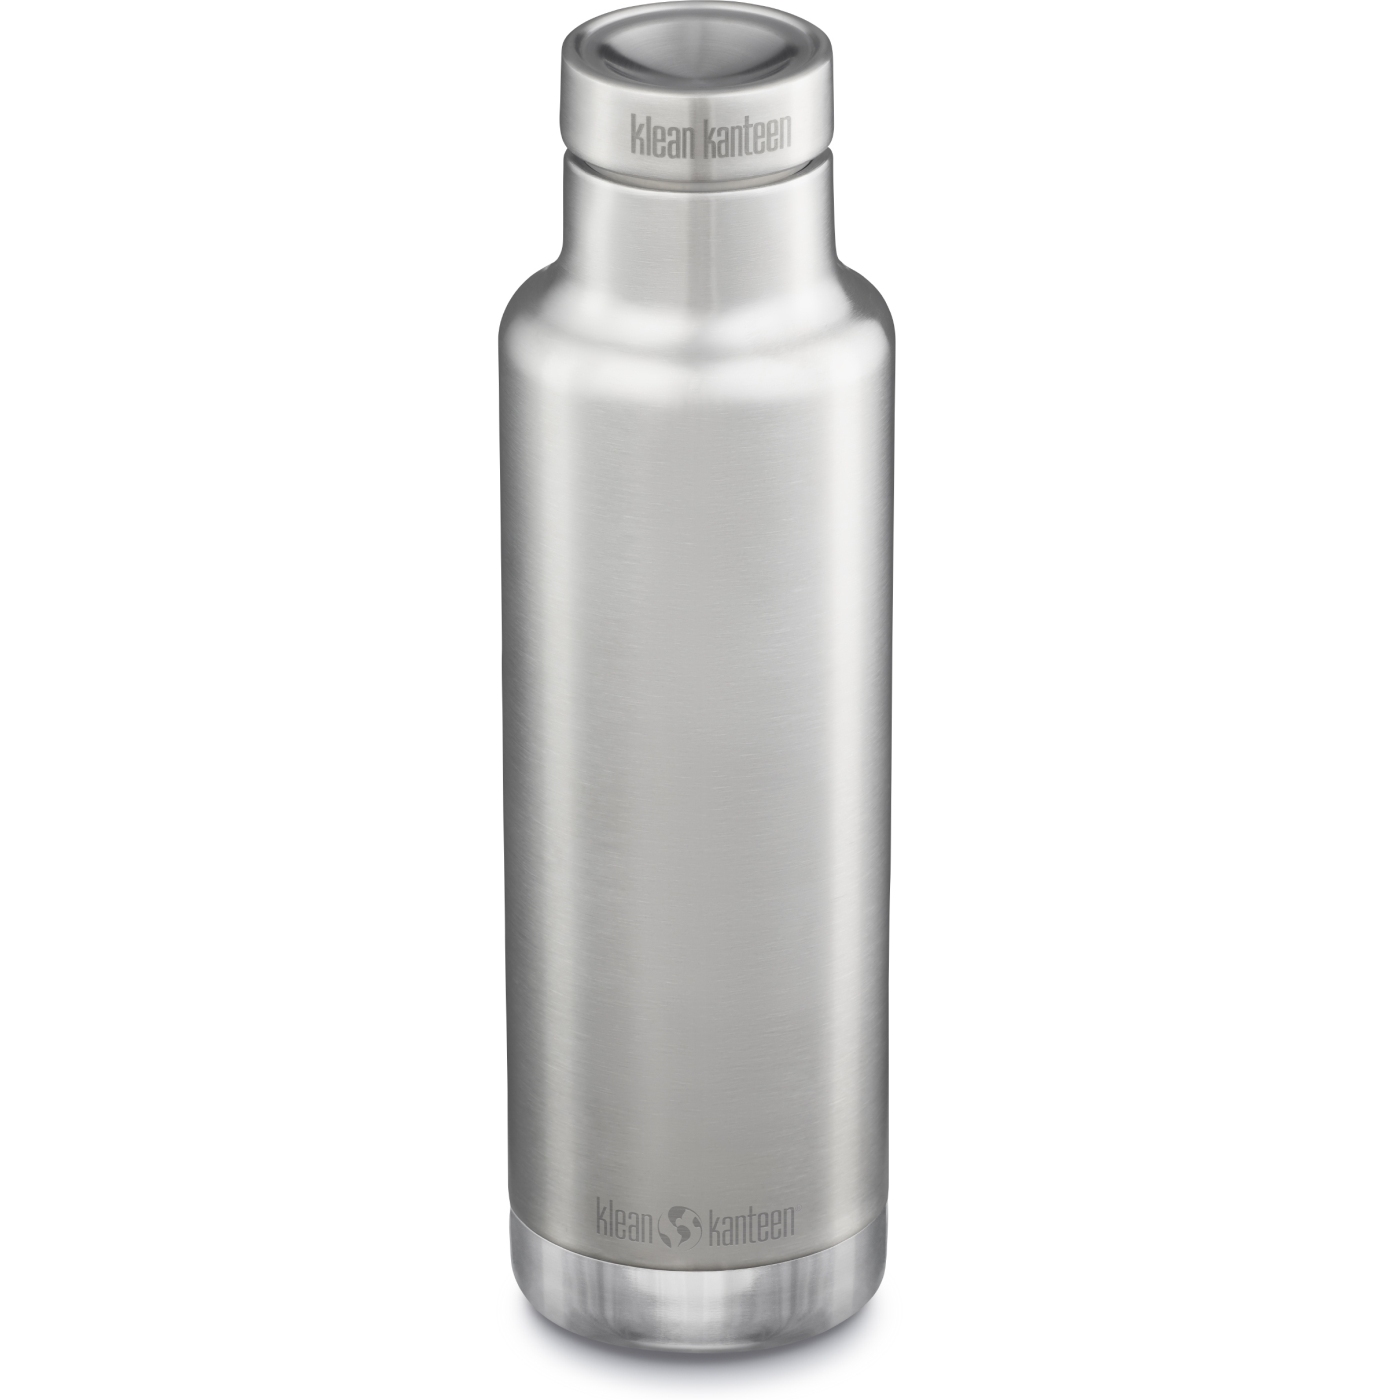 Image of Klean Kanteen Classic Insulated Bottle 750ml - Brushed Stainless - Pour Through Cap